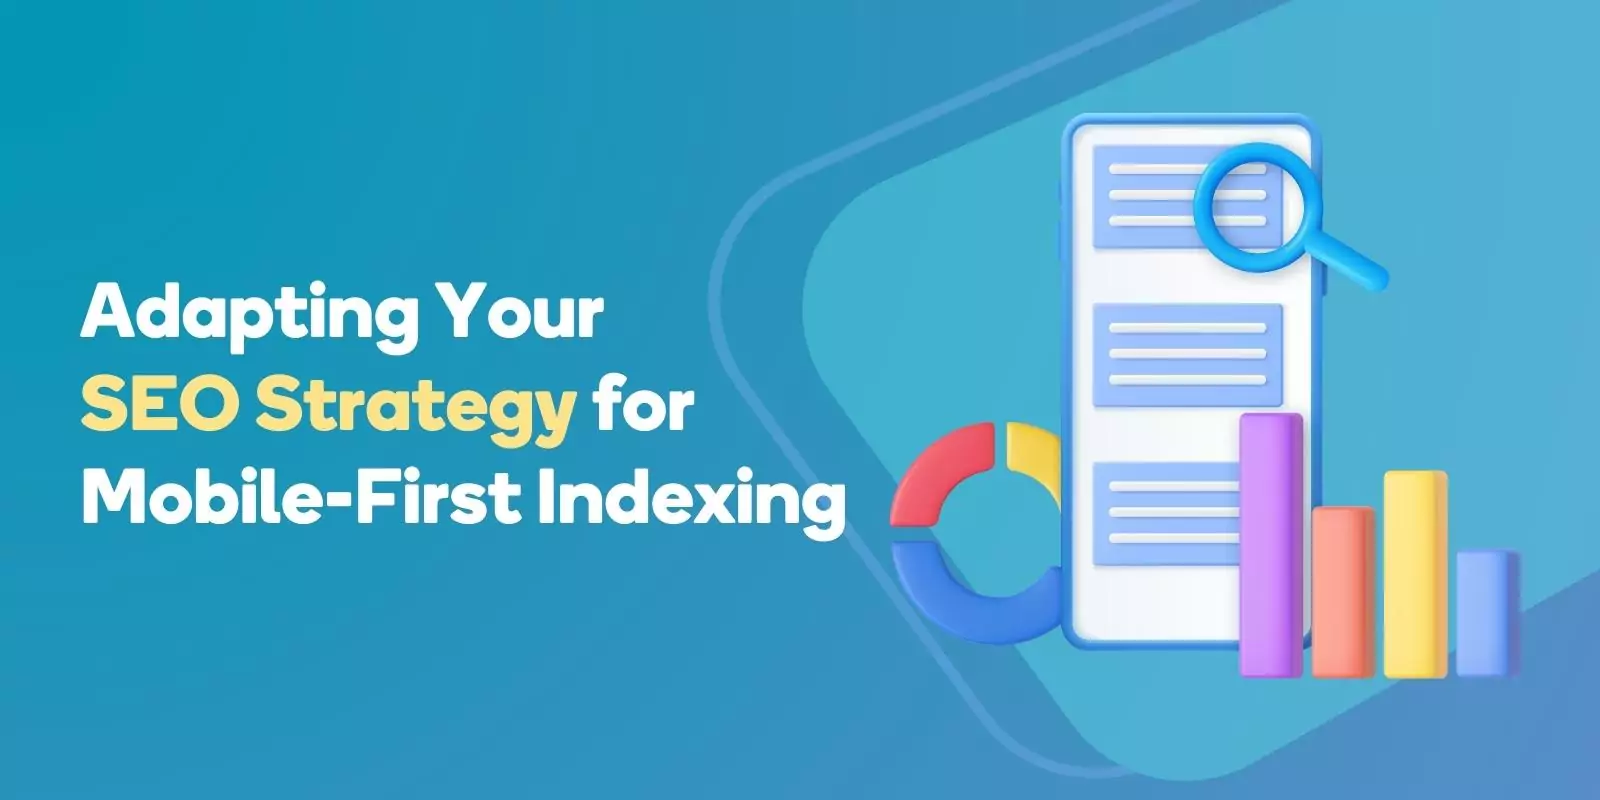 Adapting Your SEO Strategy for Mobile-First Indexing